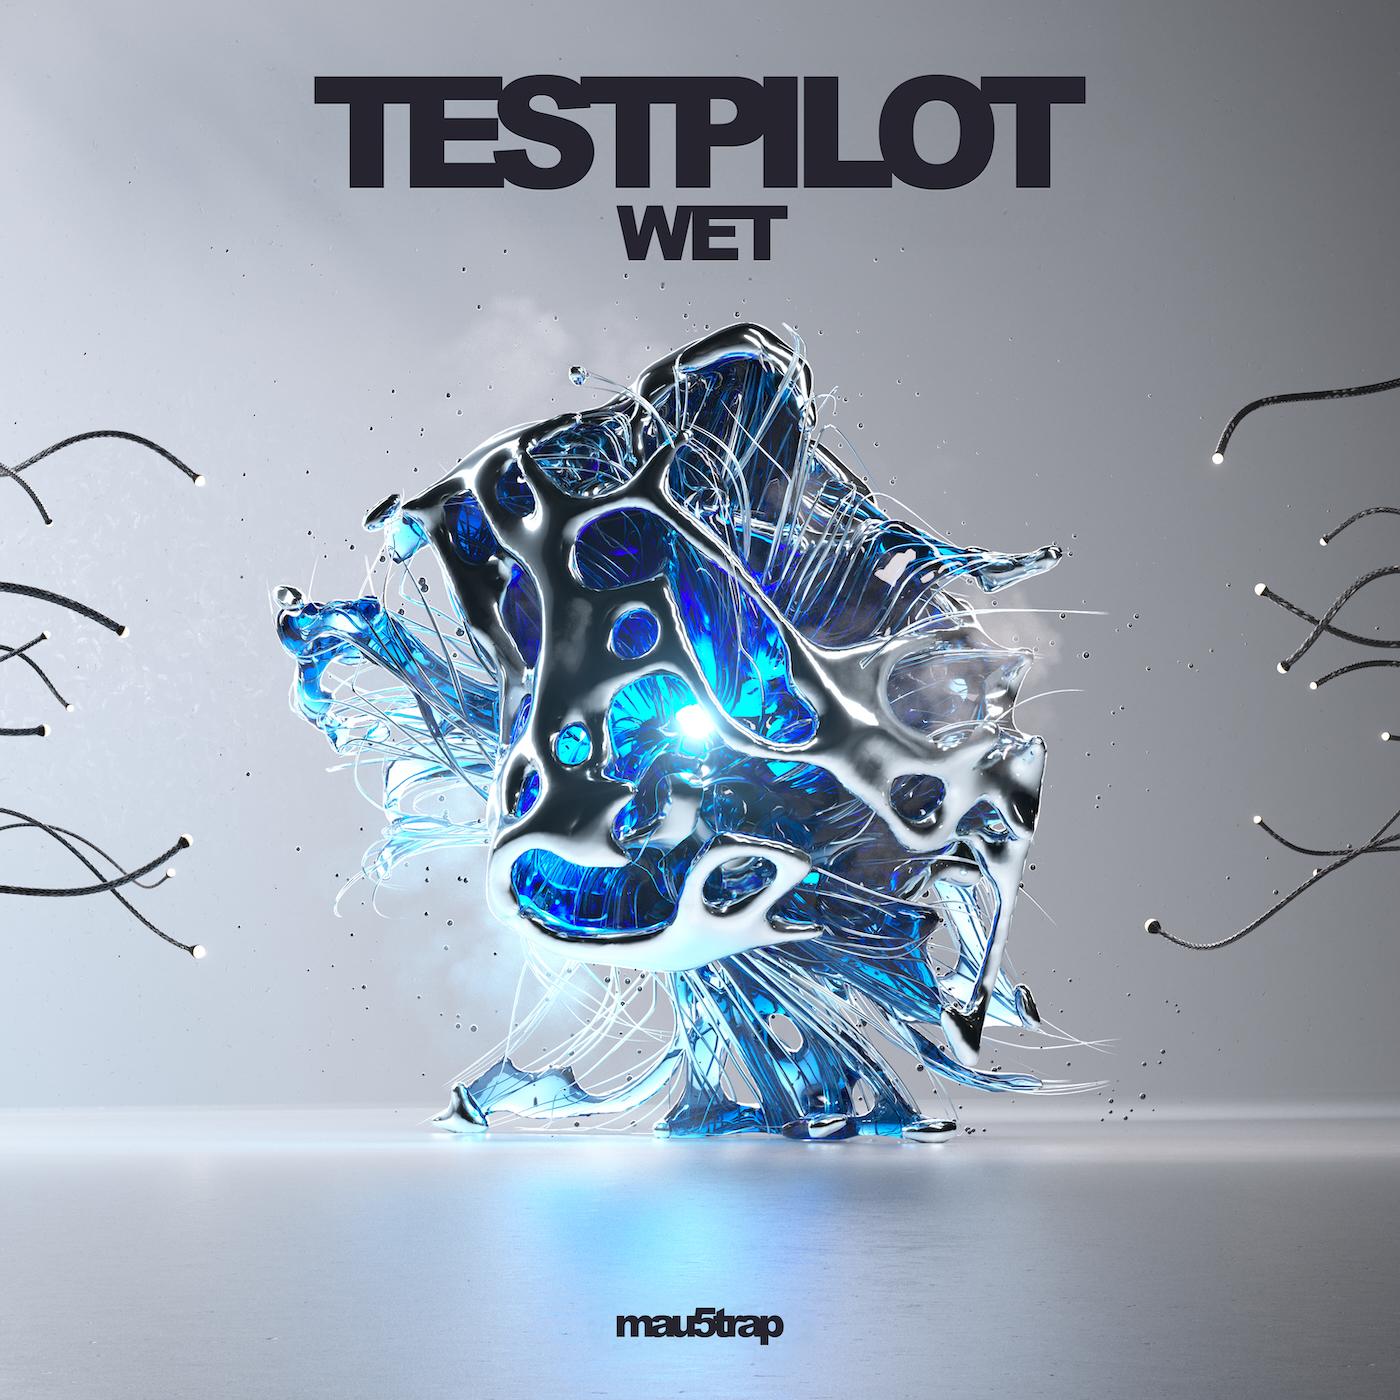 TESTPILOT NEW SINGLE “WET” OUT TODAY, JULY 12 ON mau5trap